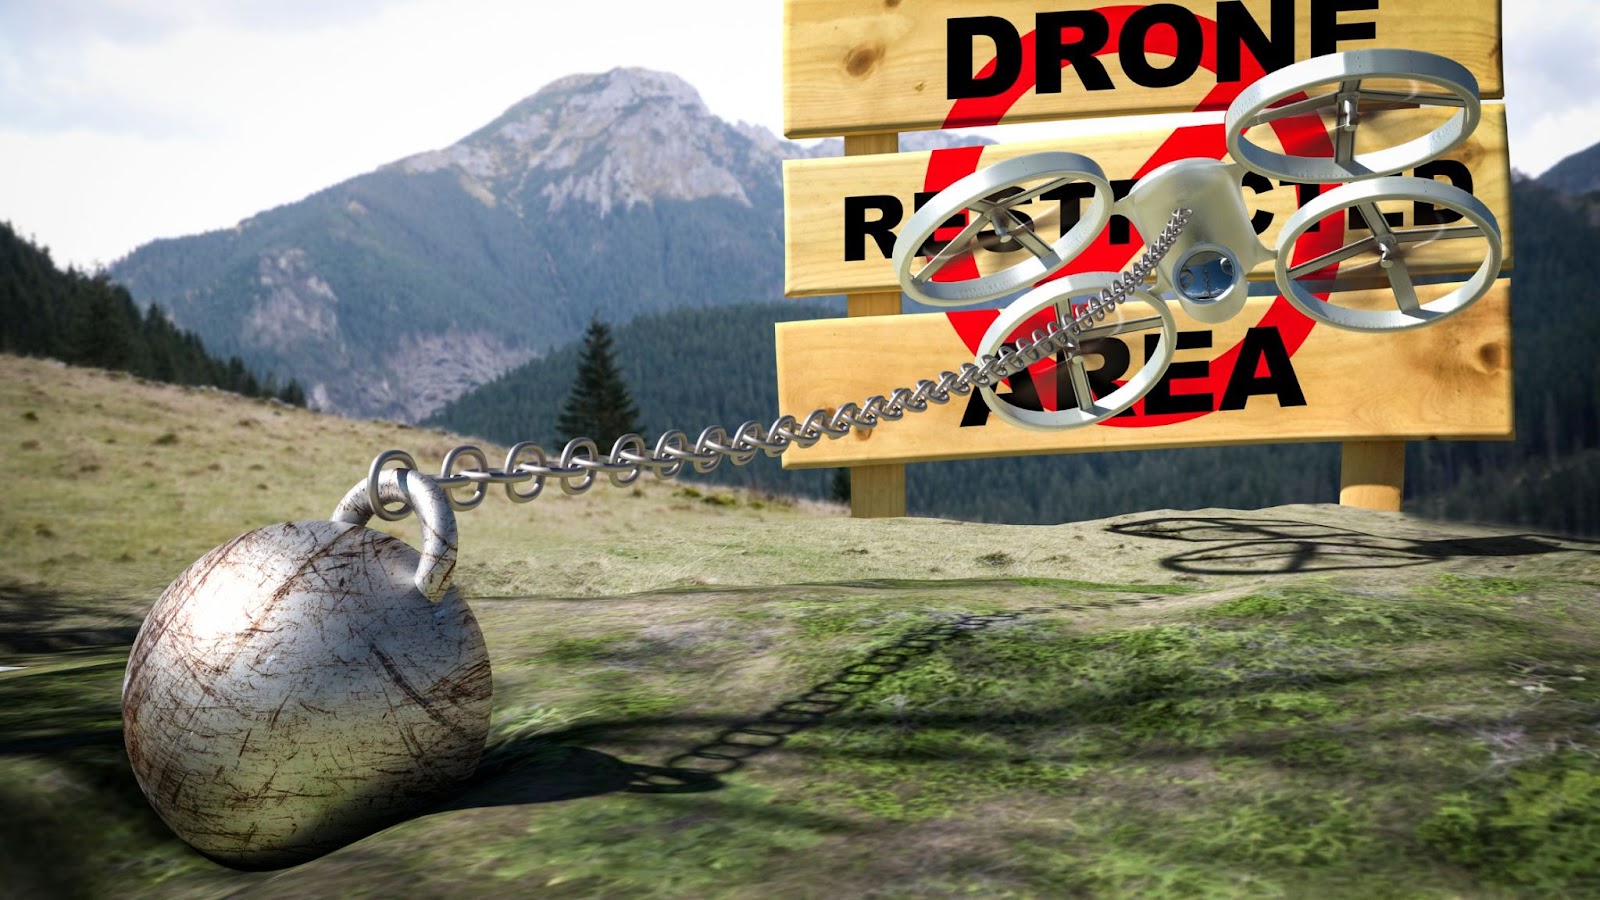 stop drones from flying over your house